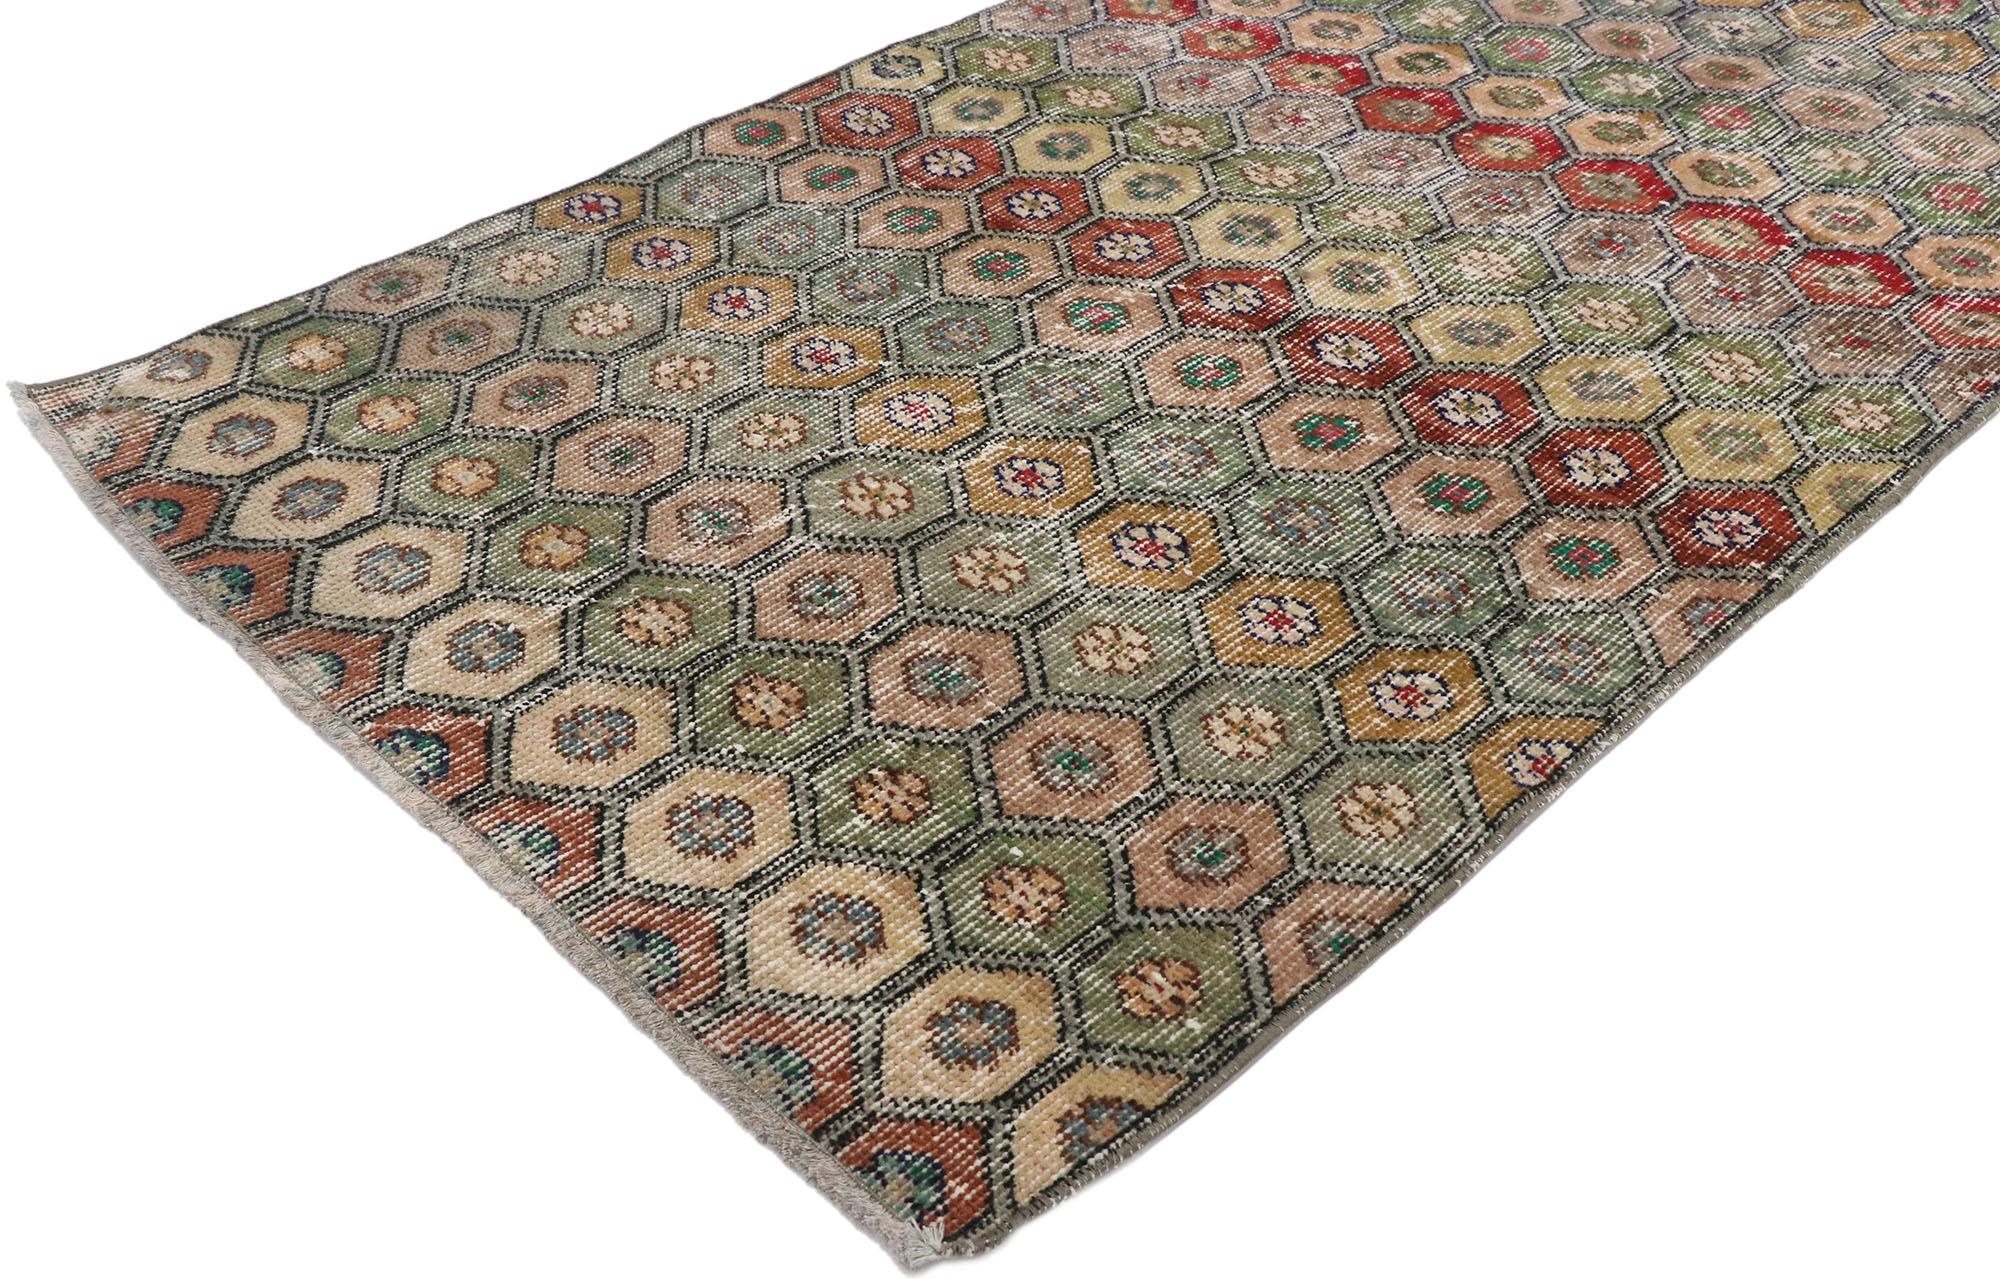 53312 Distressed vintage Turkish Sivas rug with Modern Rustic Bungalow style. This hand knotted wool distressed vintage Turkish Sivas rug features an all-over botanical lattice pattern comprised of ogival shapes embellished with rosette florals. The